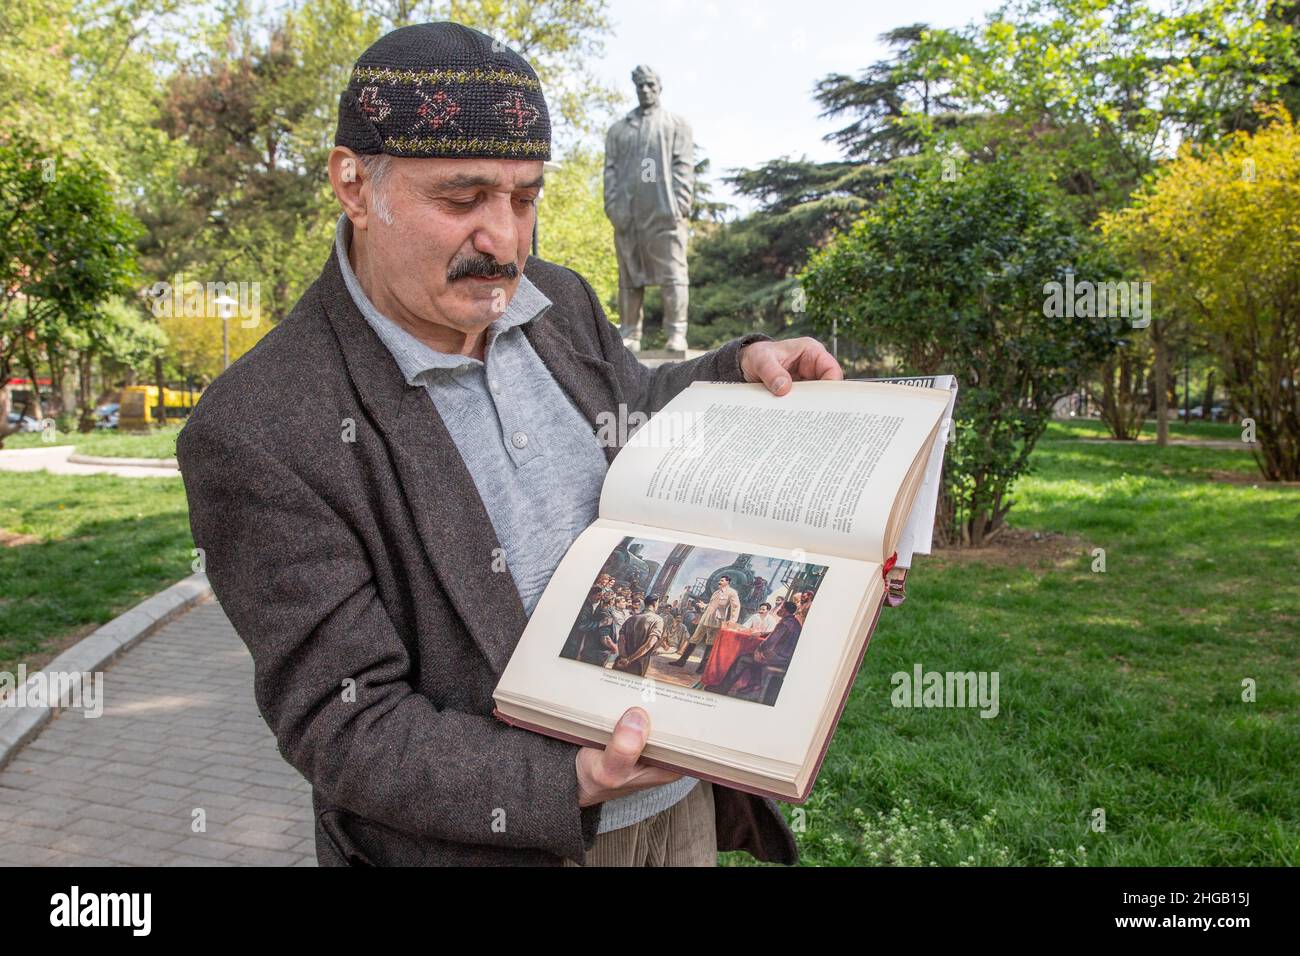 A man shows a book with pictures of Stalin, Tbilisi, Georgia, in front of the Mayakovski statue Stock Photo